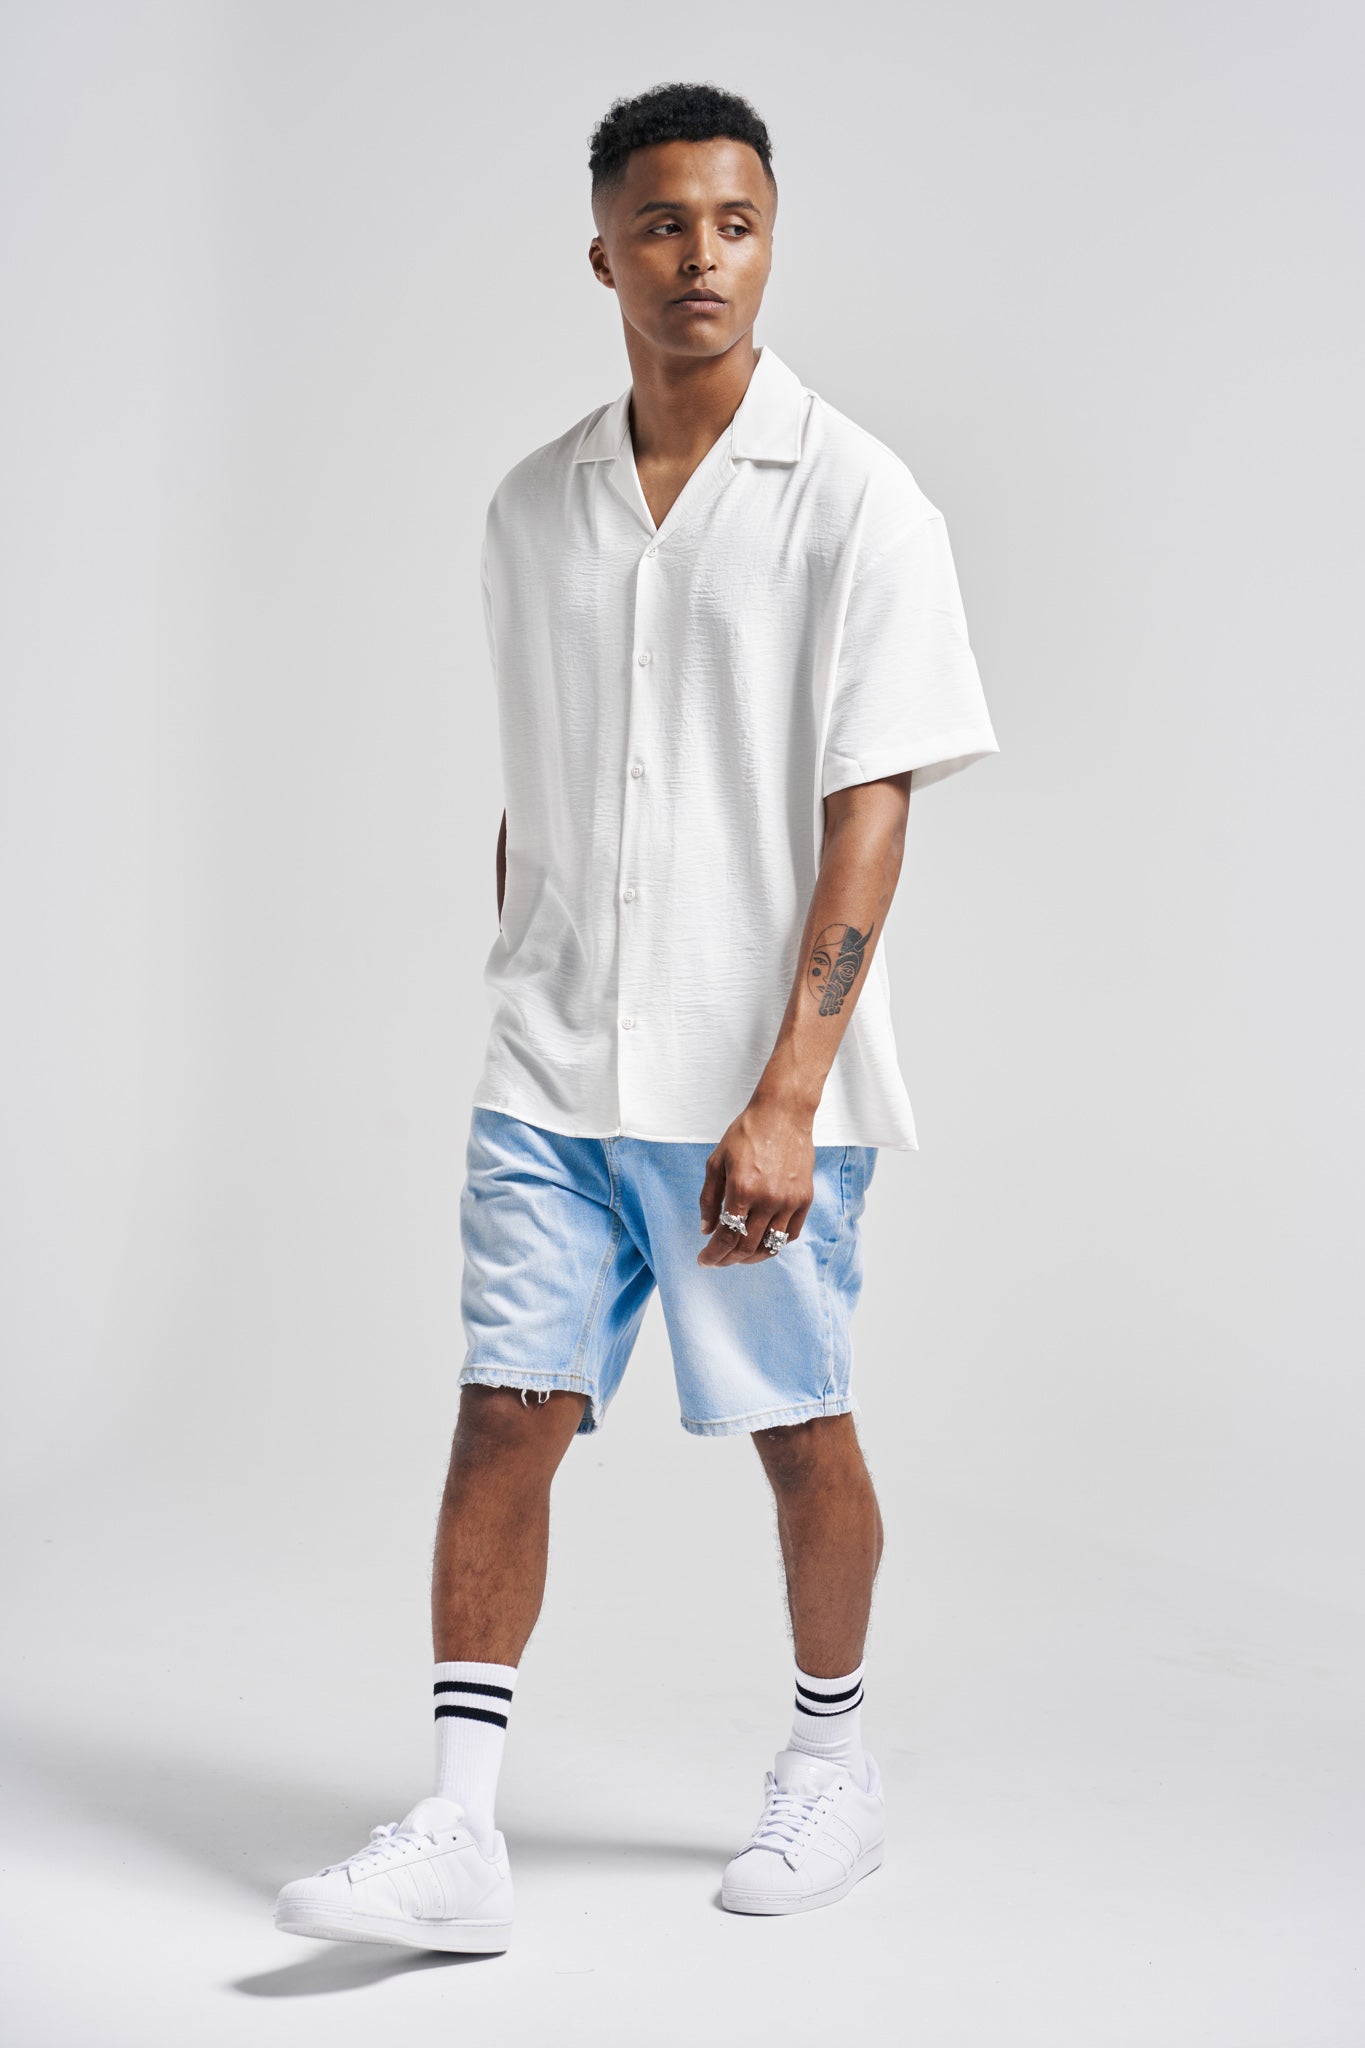 Wrinkled Textured Look Shirt